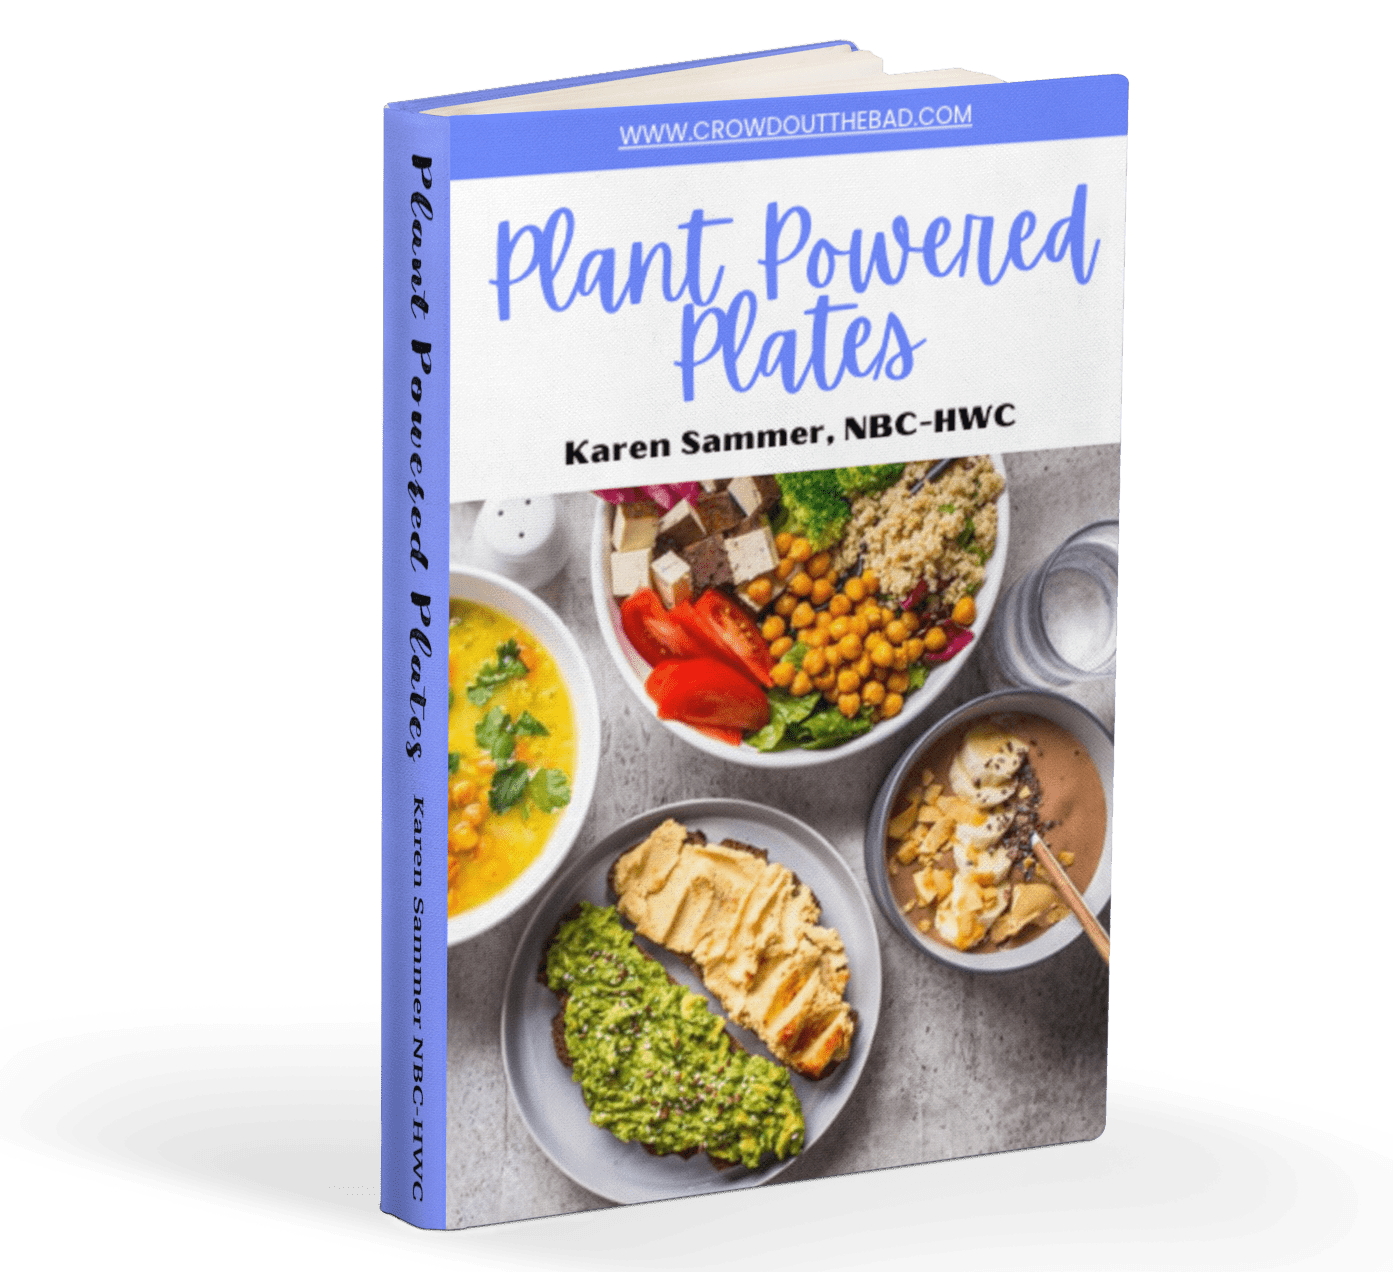 plant powered plates book cover